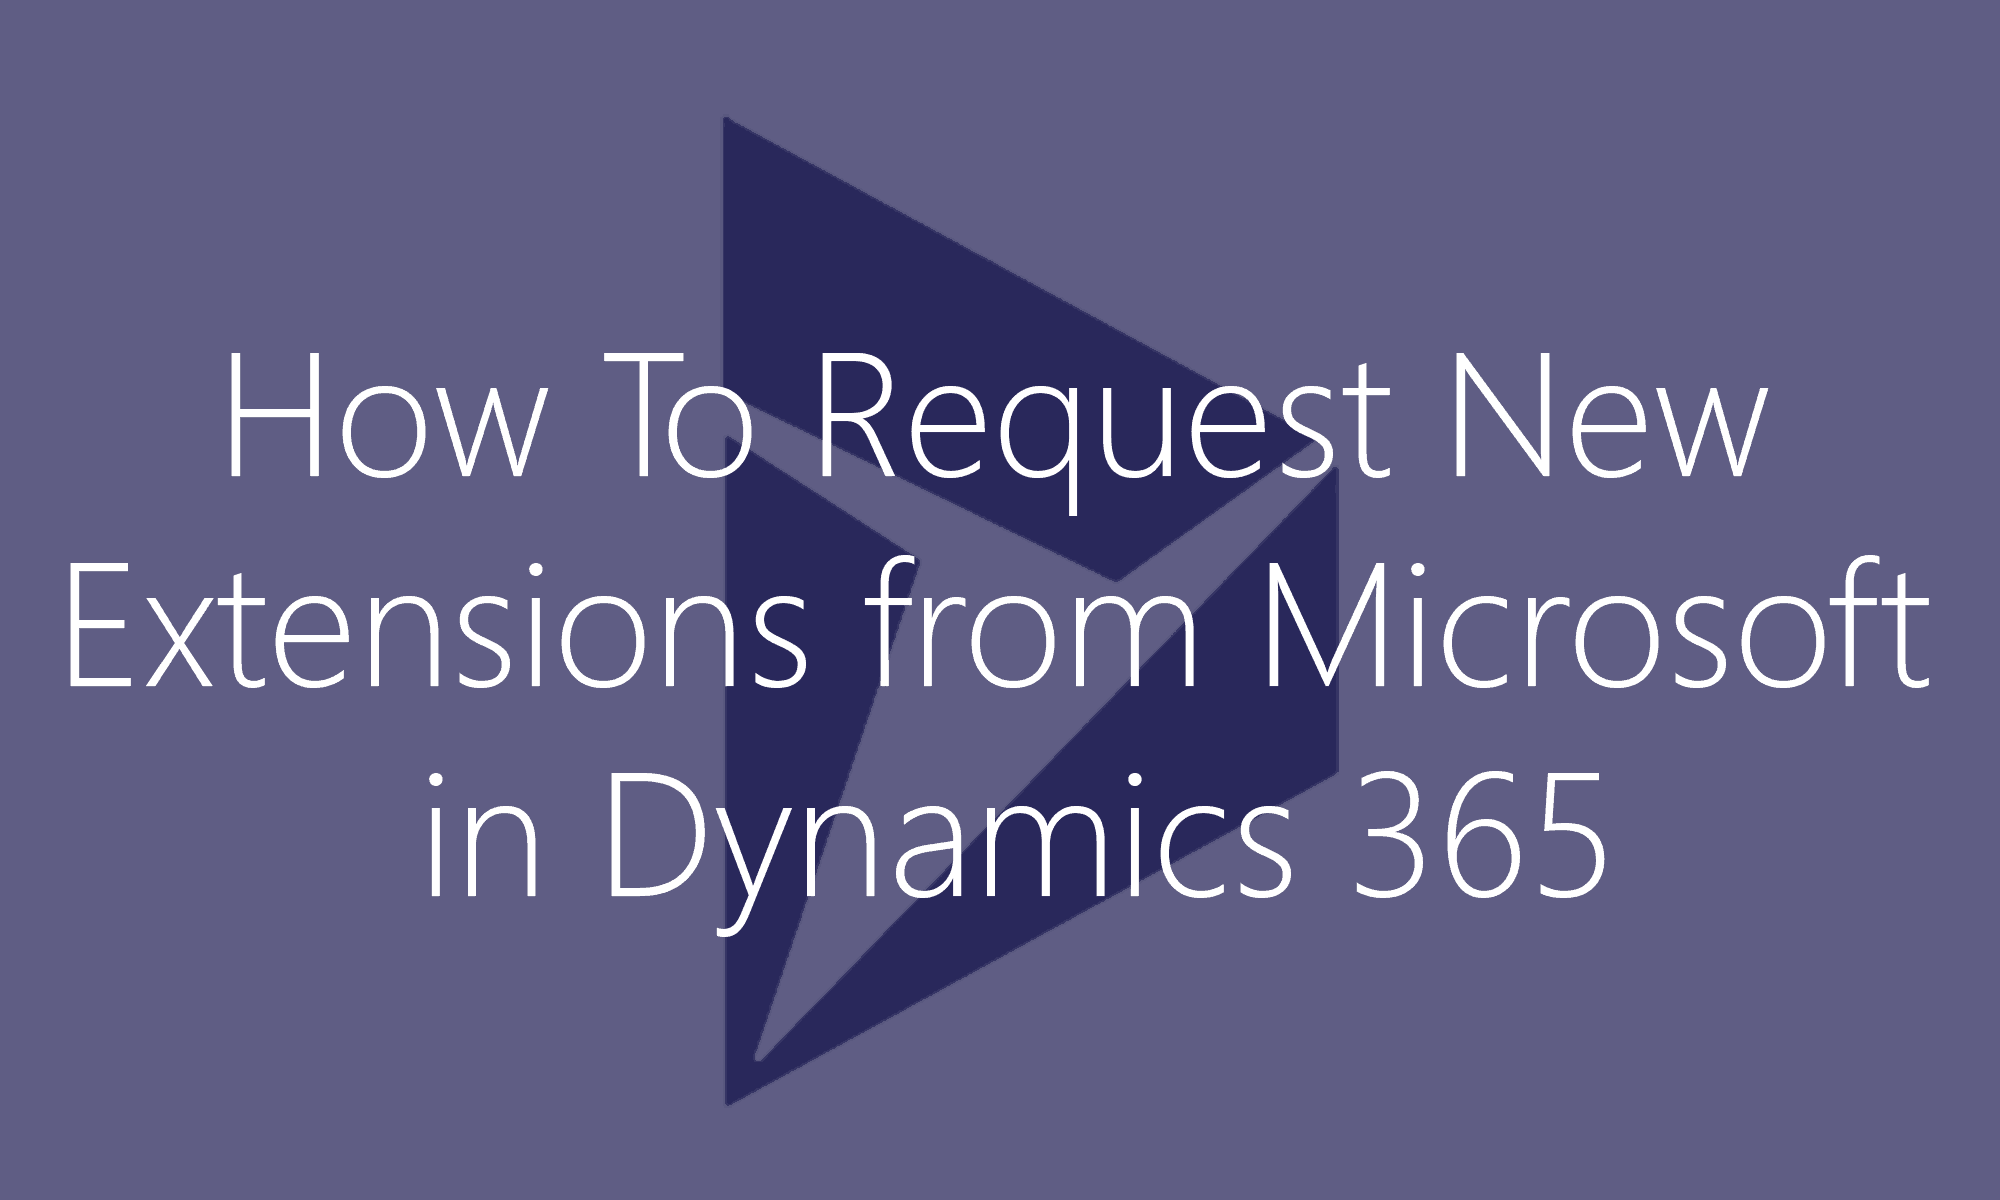 How to request extensions from Microsoft in Dynamics 365